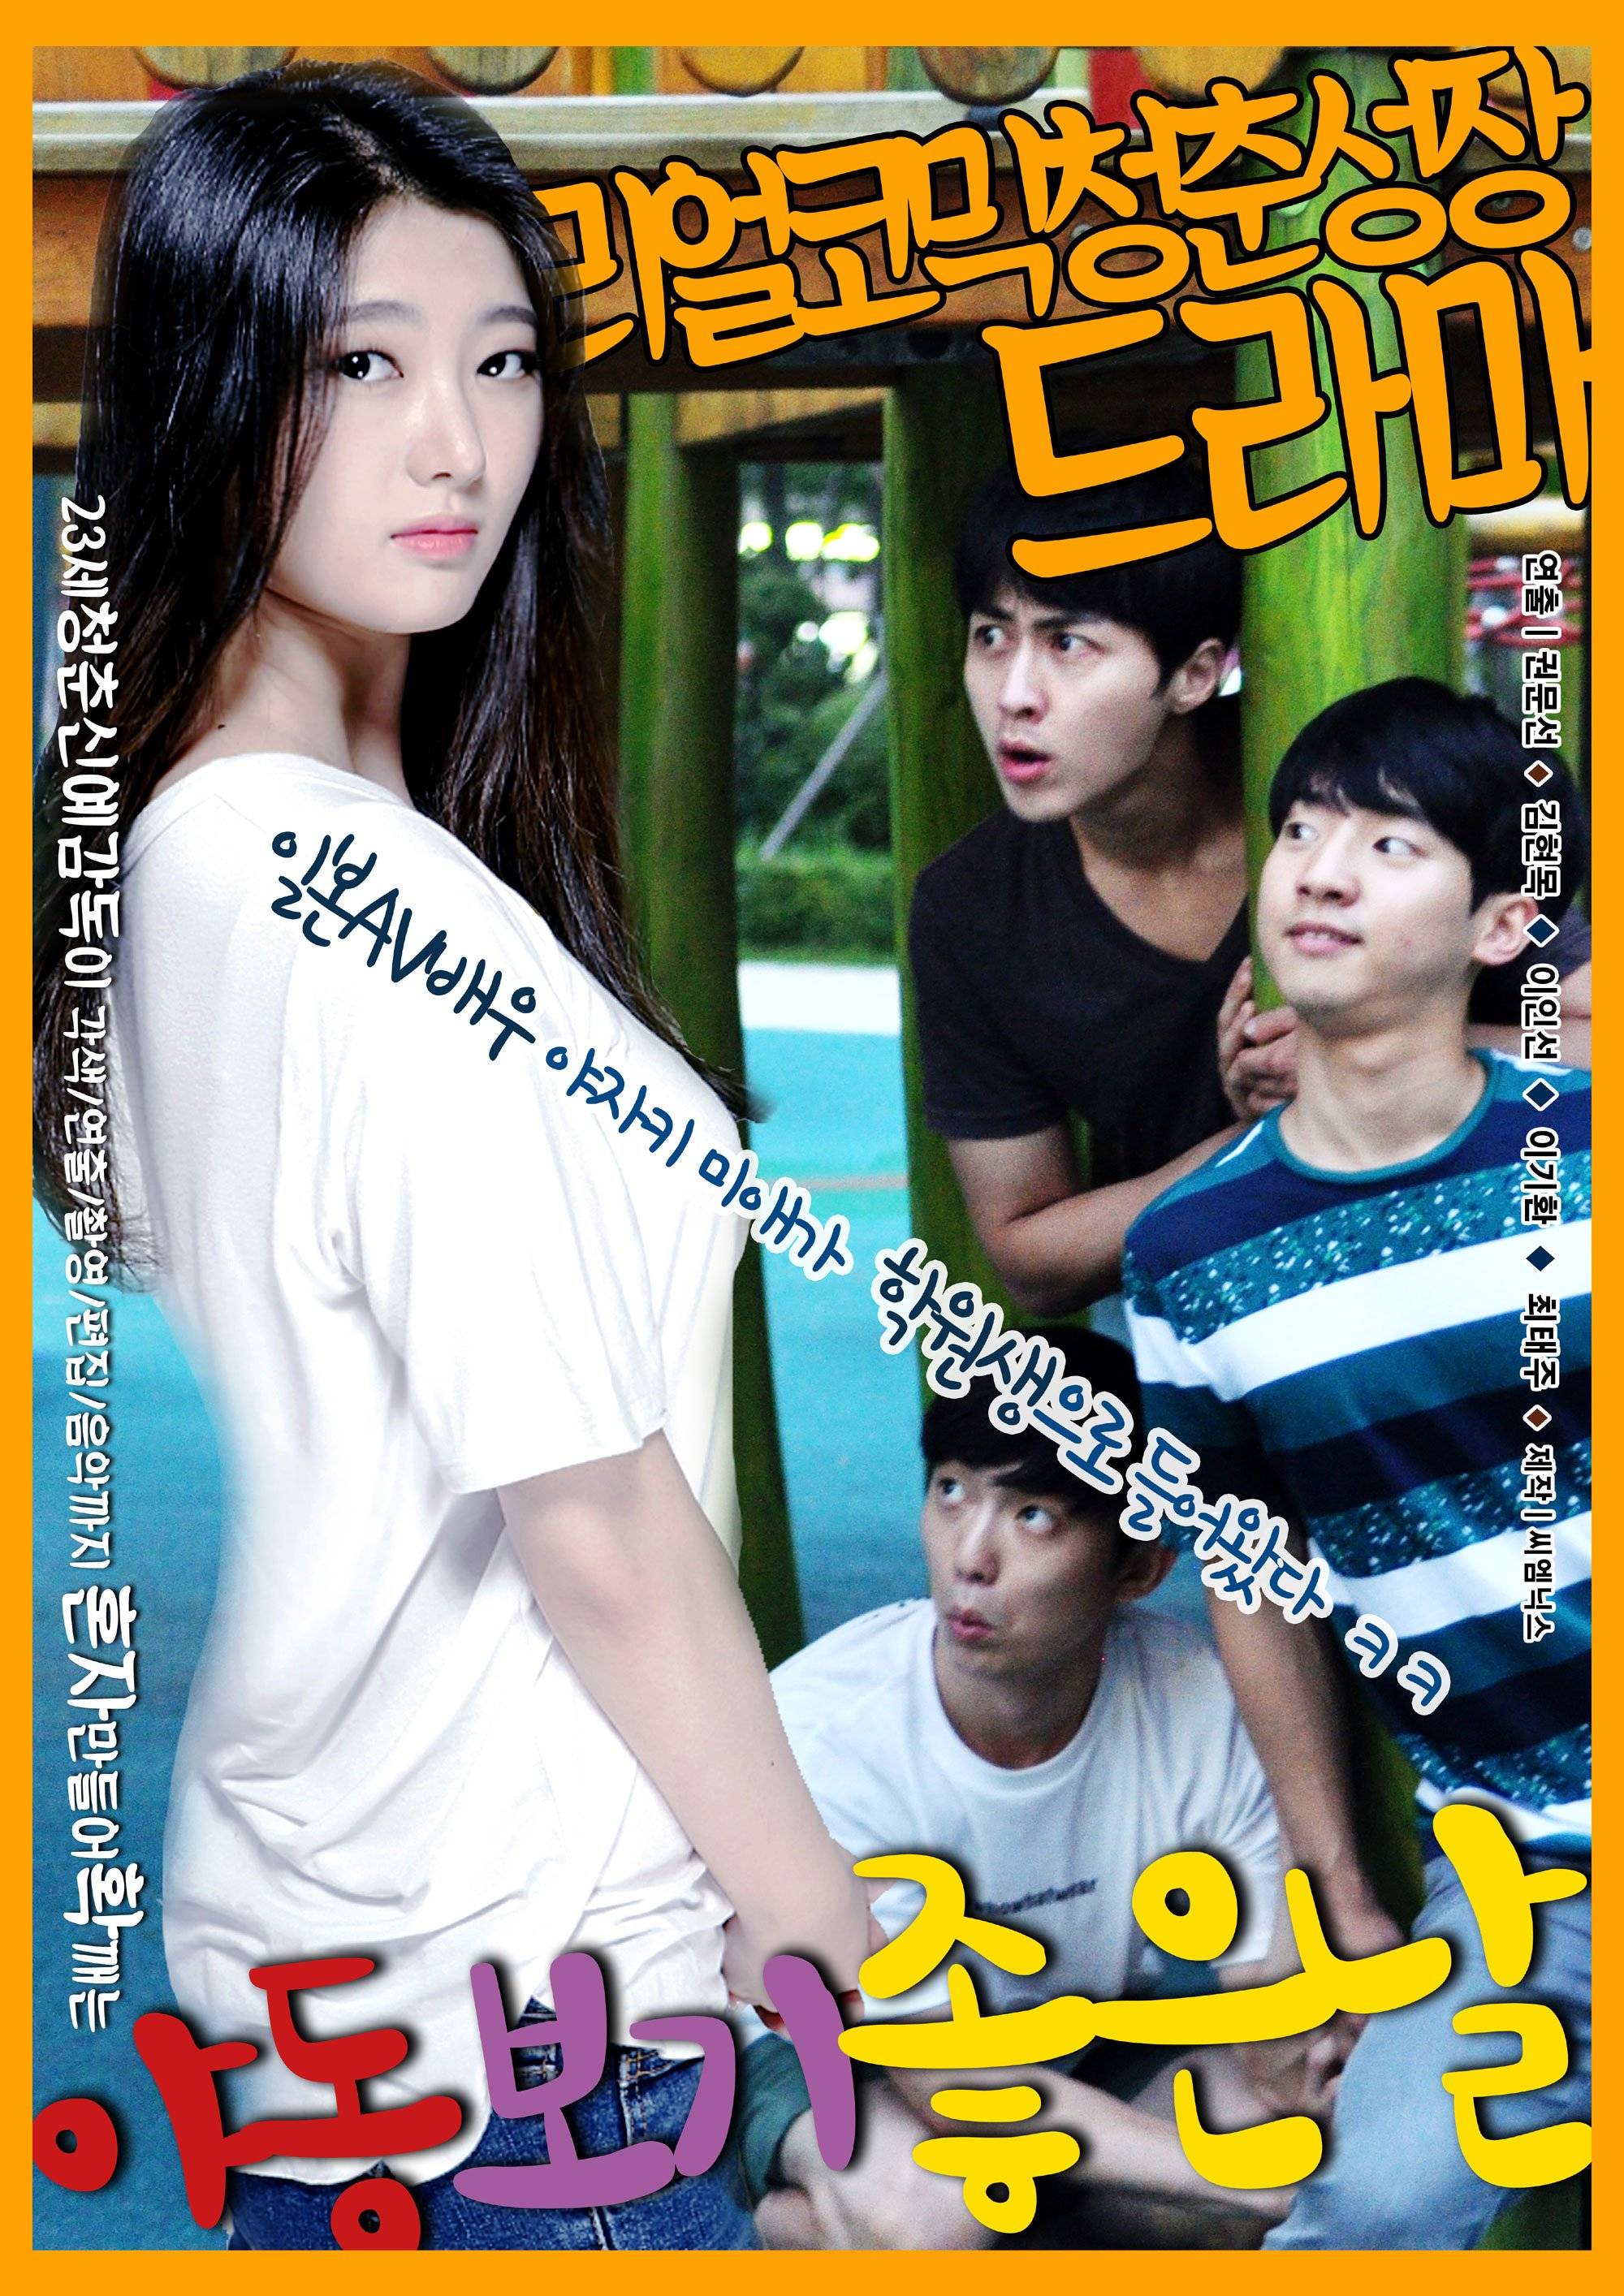 New Sexxy Movie Com - Photo] Added new poster for the upcoming Korean movie 'Good Day For Sexy  Video' @ HanCinema